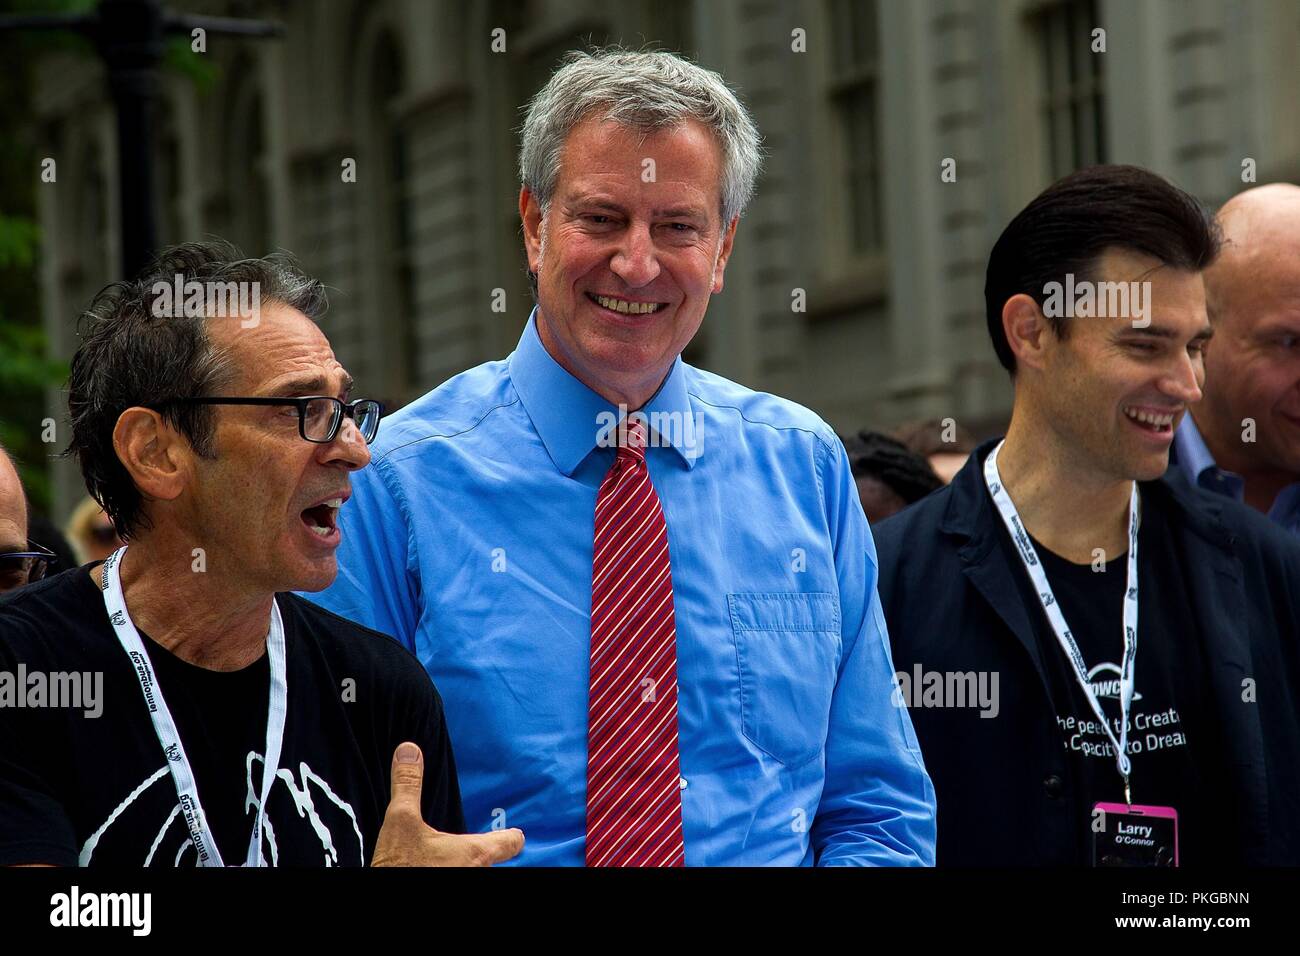 New York, NY, USA. 13th Sep, 2018. Brian Rothschild, Bill de Blasio, Larry  O'Connor at a public appearance for The John Lennon Educational Tour Bus  Returns to NYC, New York City Hall,